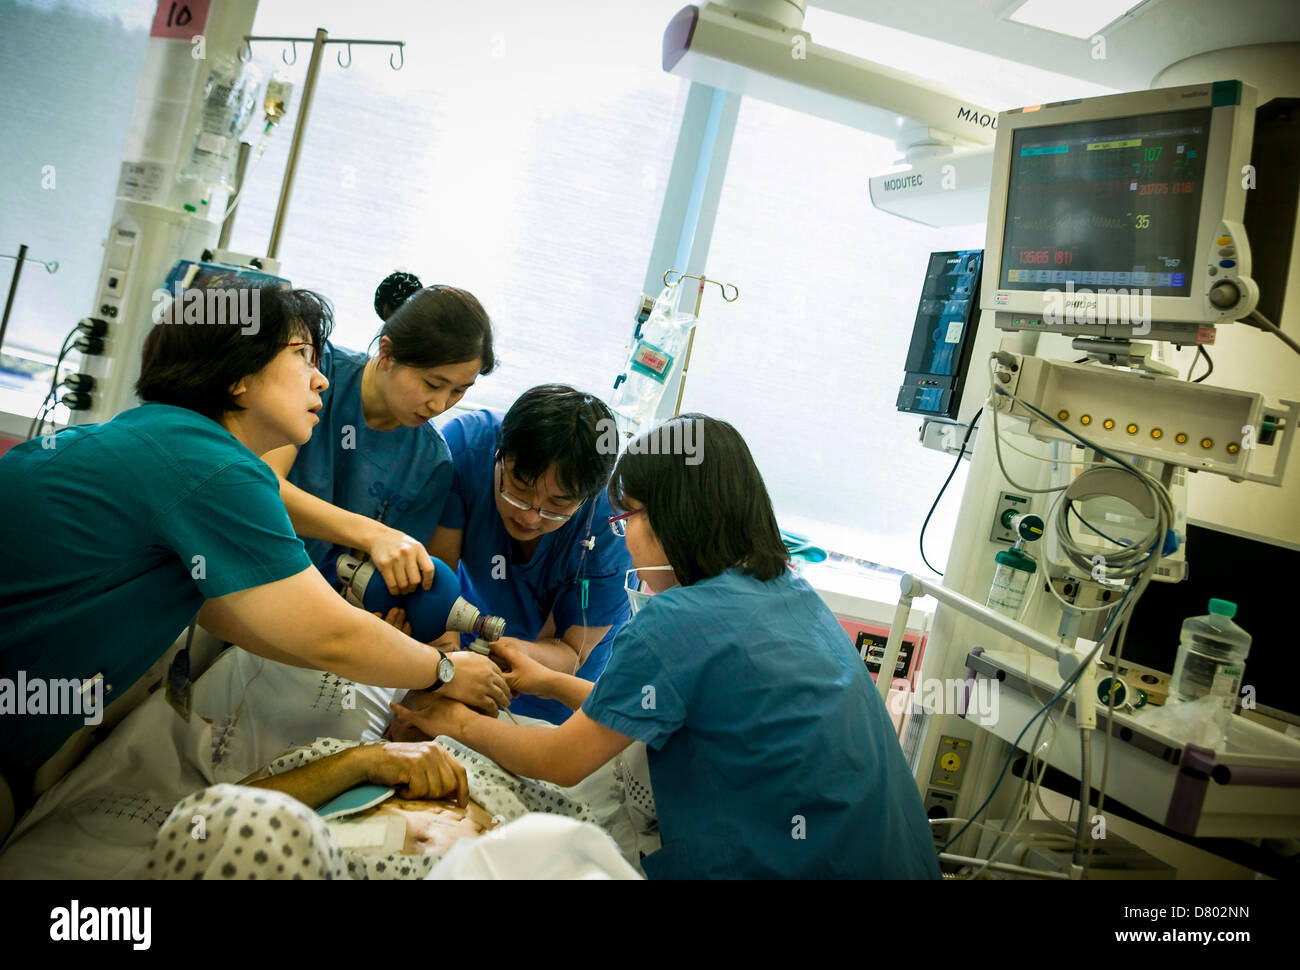 Medical staff use an oxygen tank to help revive the patient who is under anaesthetic in the intensive care unit. Stock Photo